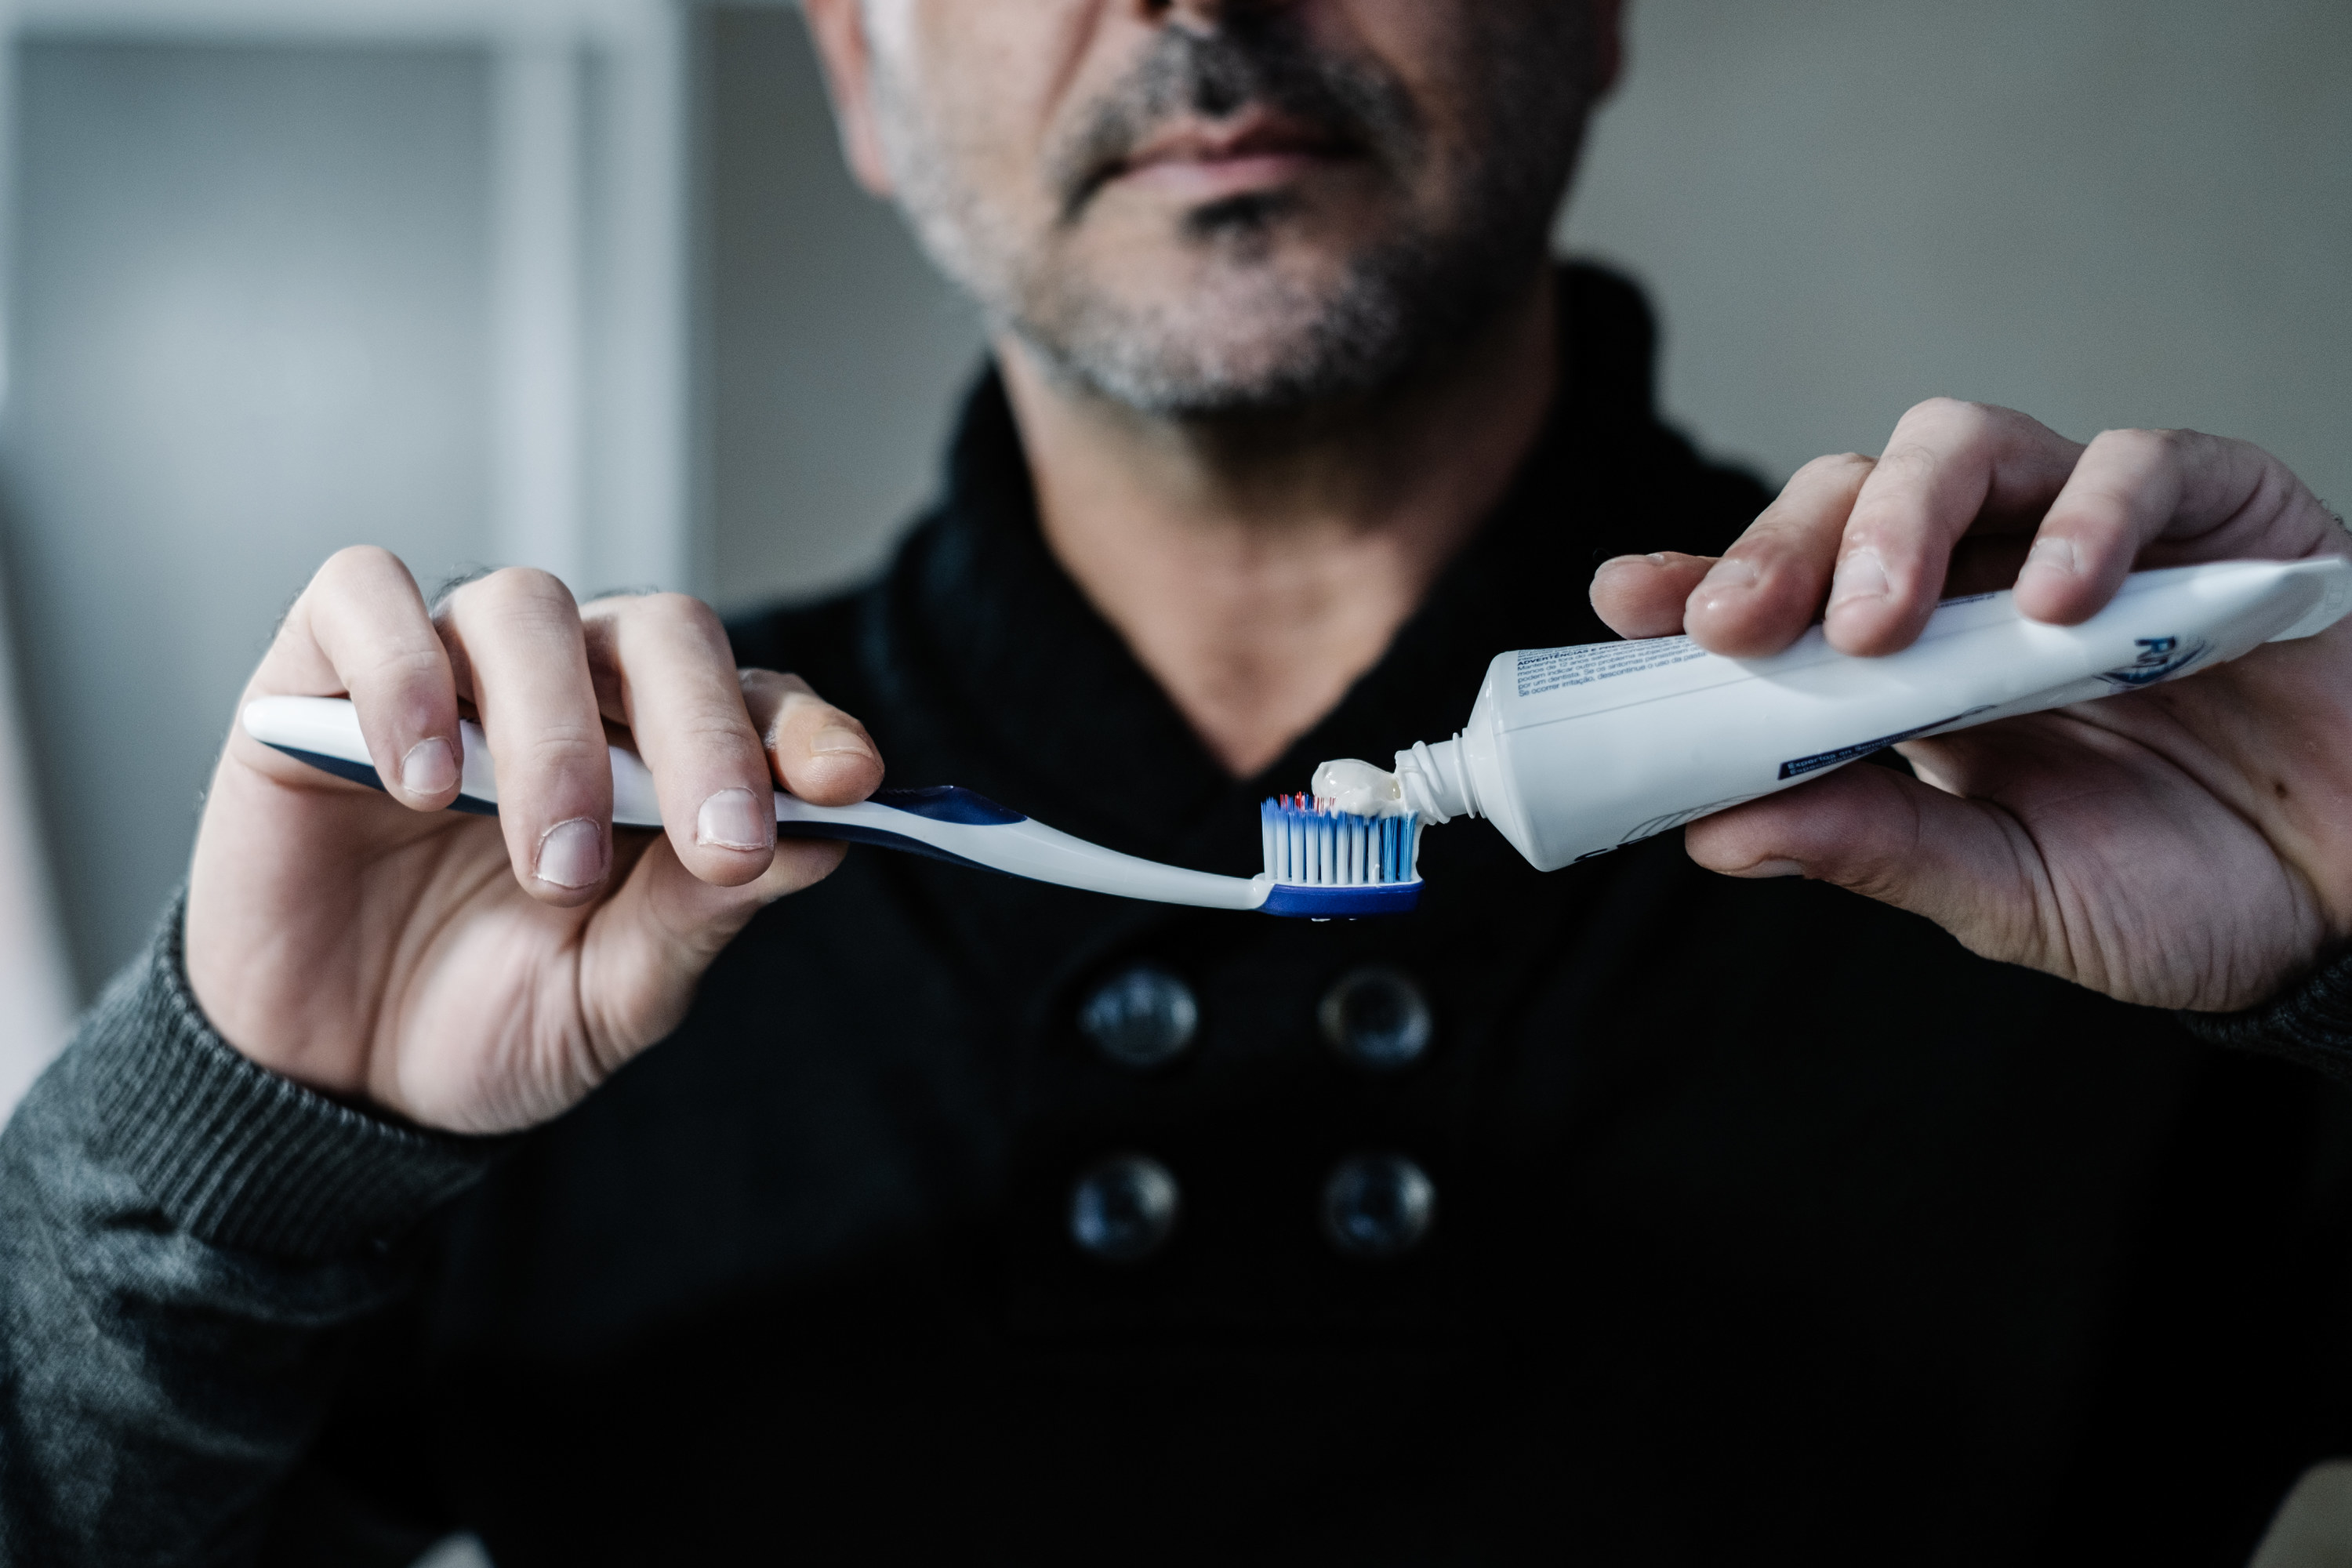 A man putting toothpaste onto a toothbrush